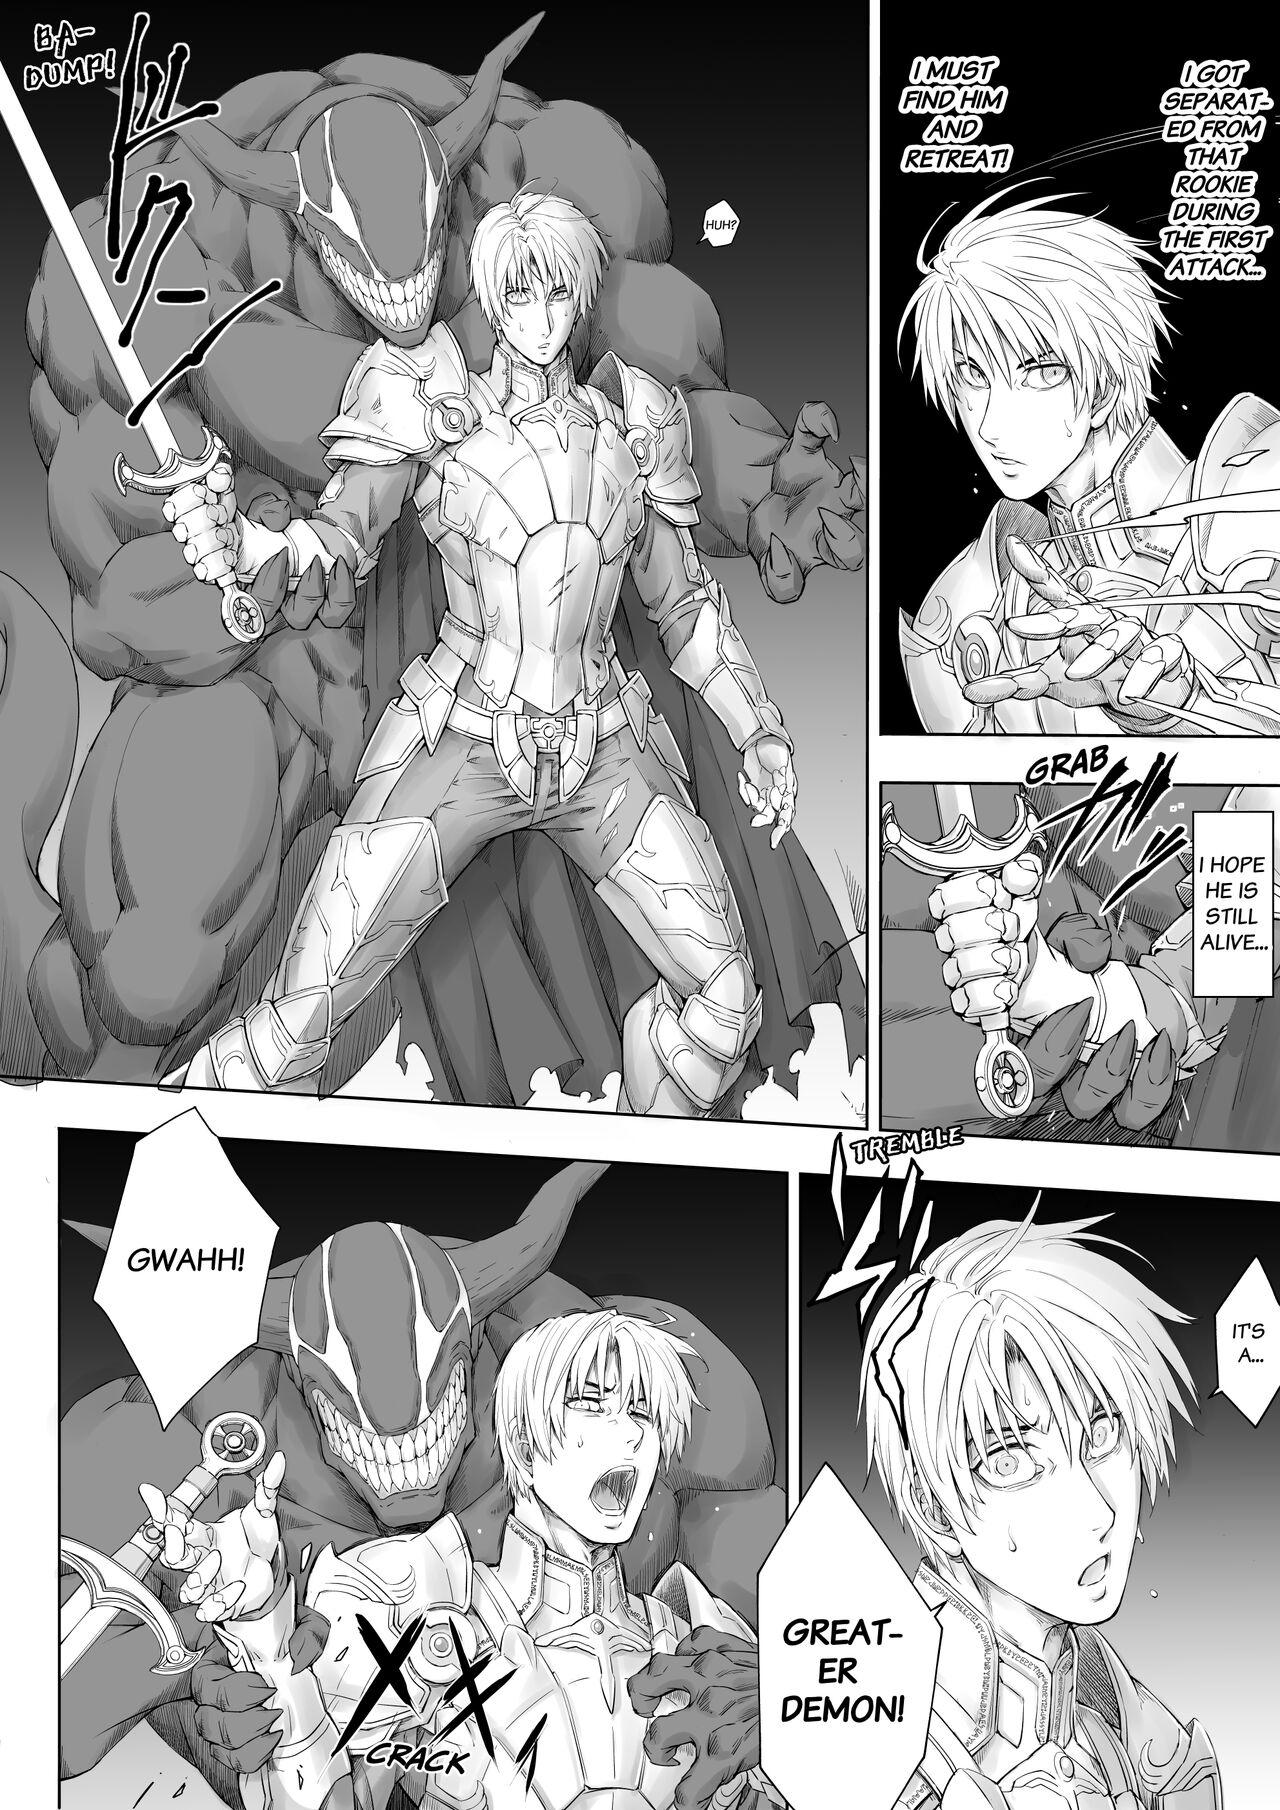 Home Knight of the Labyrinth - Original Stepdad - Page 8